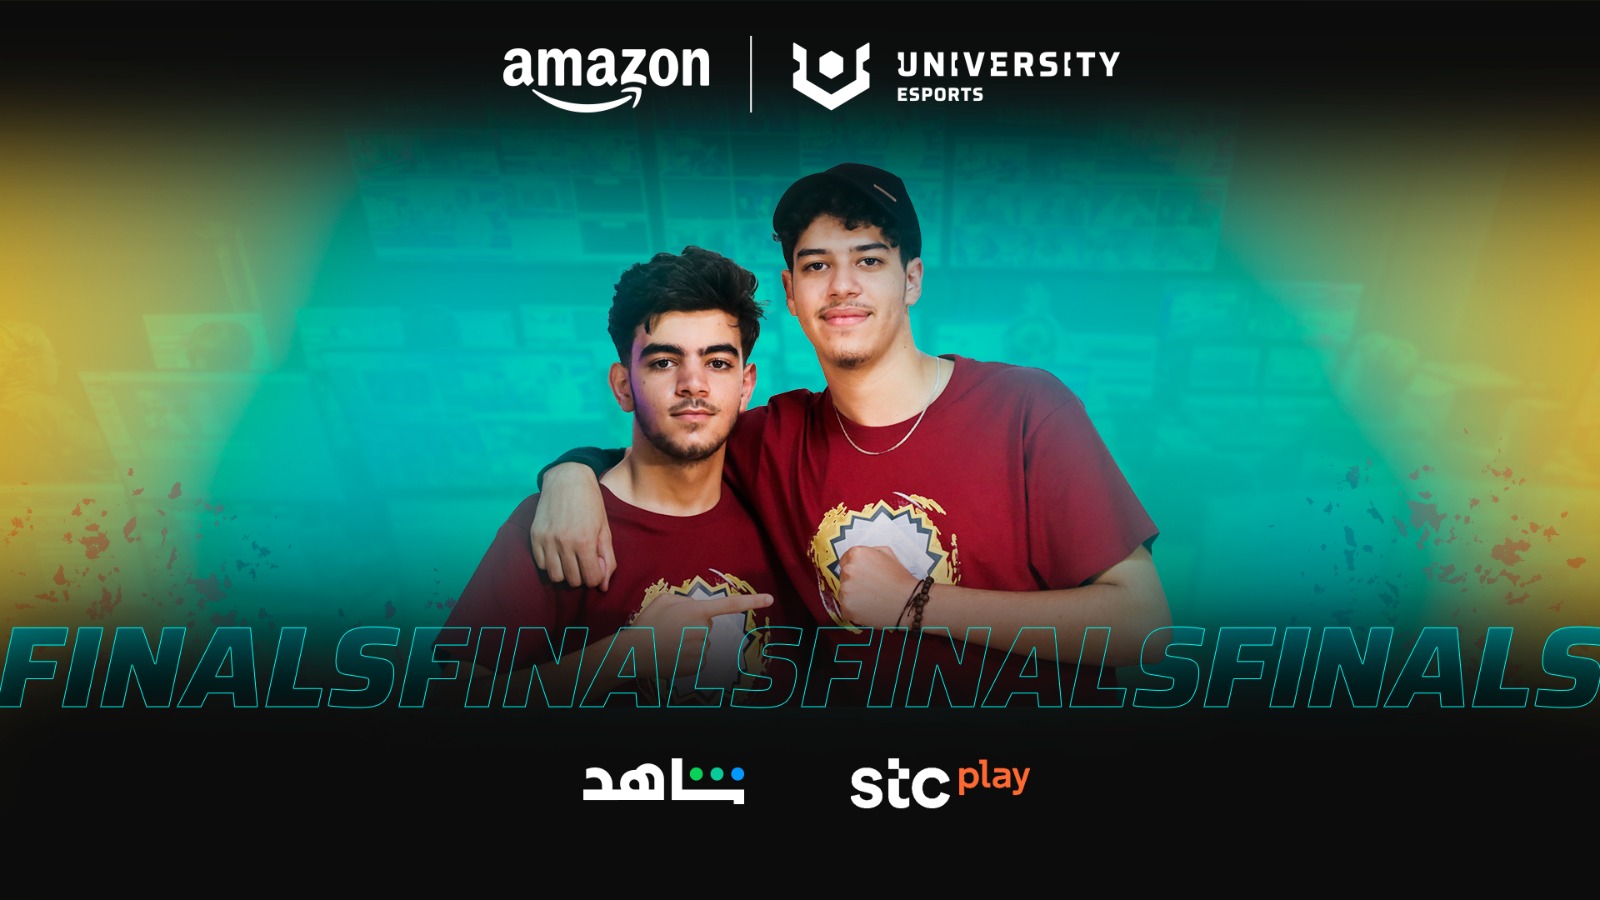 Amazon UNIVERSITY Esports competition Season 2 Spring Split concludes with more than 1,900 players from over 65 KSA universities